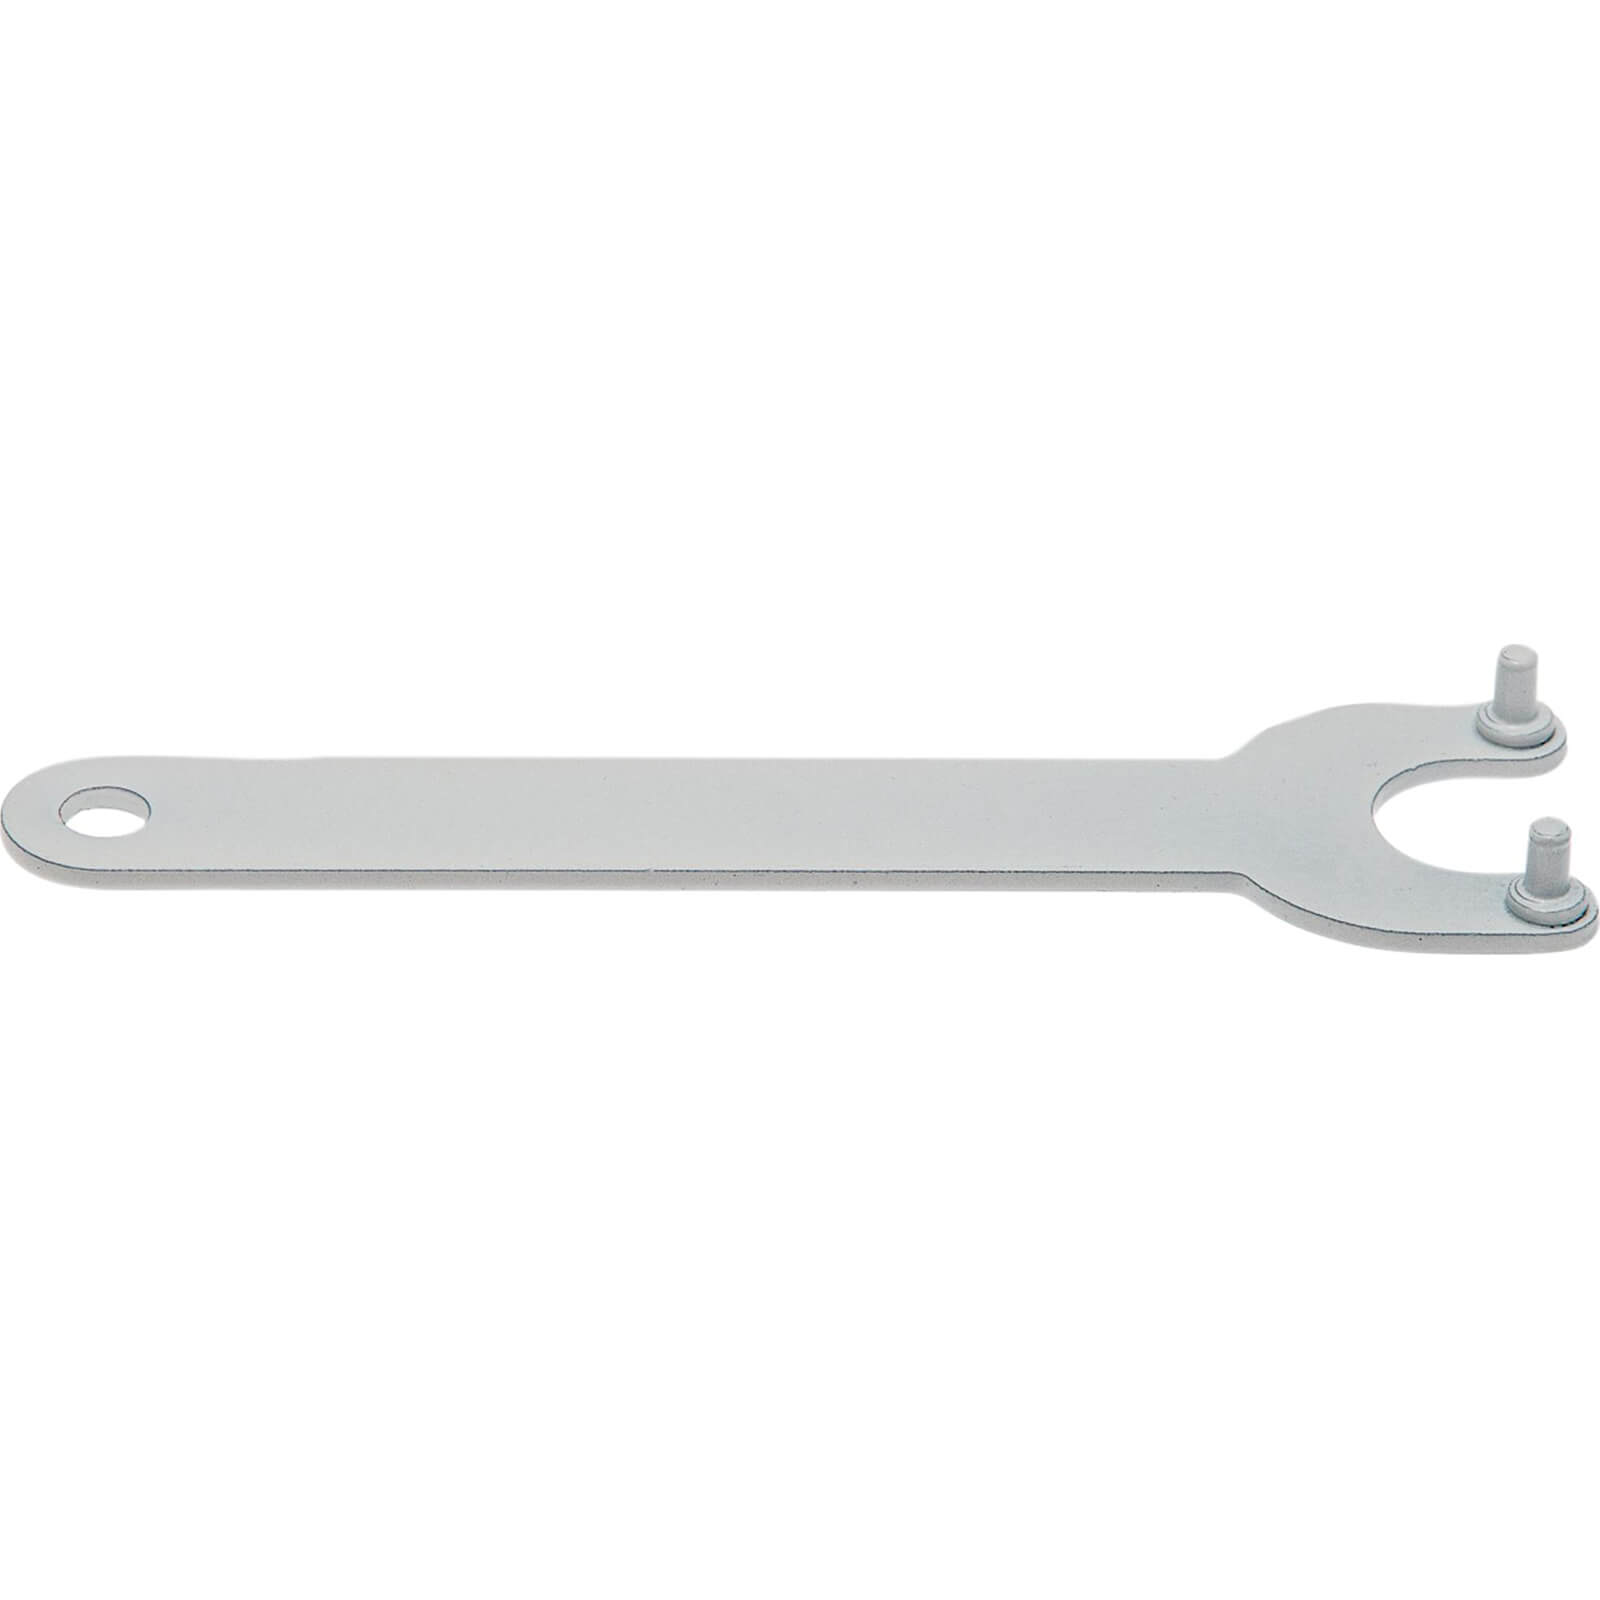 Image of Flexipads 30-4 White Angle Grinder Pin Spanner